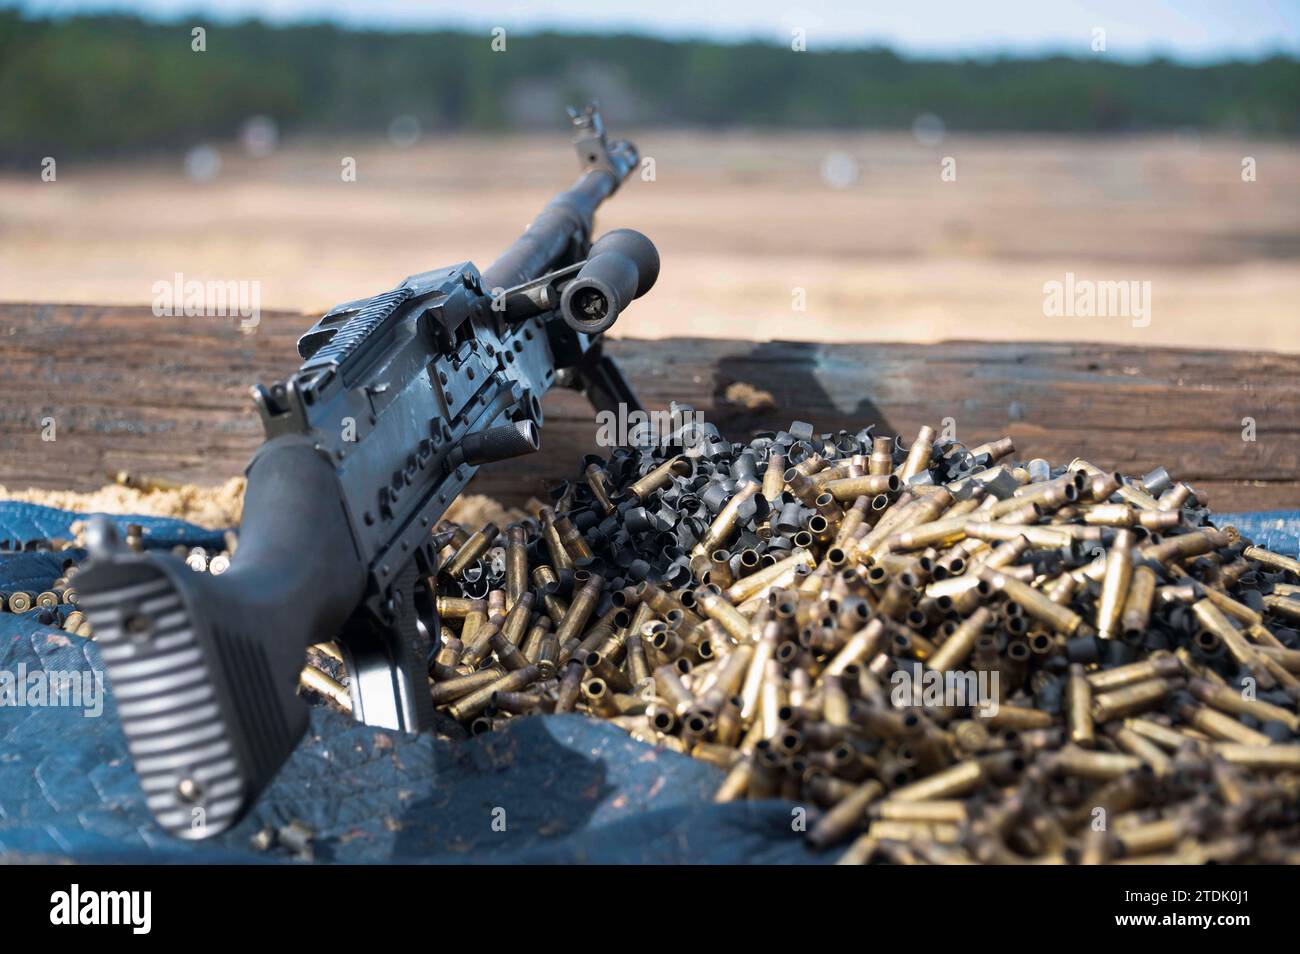 https://c8.alamy.com/comp/2TDK0J1/a-pile-of-expended-ammunition-sits-on-the-fort-polk-louisiana-range-jan-11-2023-the-307th-security-forces-squadron-visited-the-fort-polk-shooting-range-for-regular-training-and-received-guidance-from-instructors-regarding-different-shooting-tactics-and-range-safety-us-air-force-photo-by-staff-sgt-tambri-cason-2TDK0J1.jpg